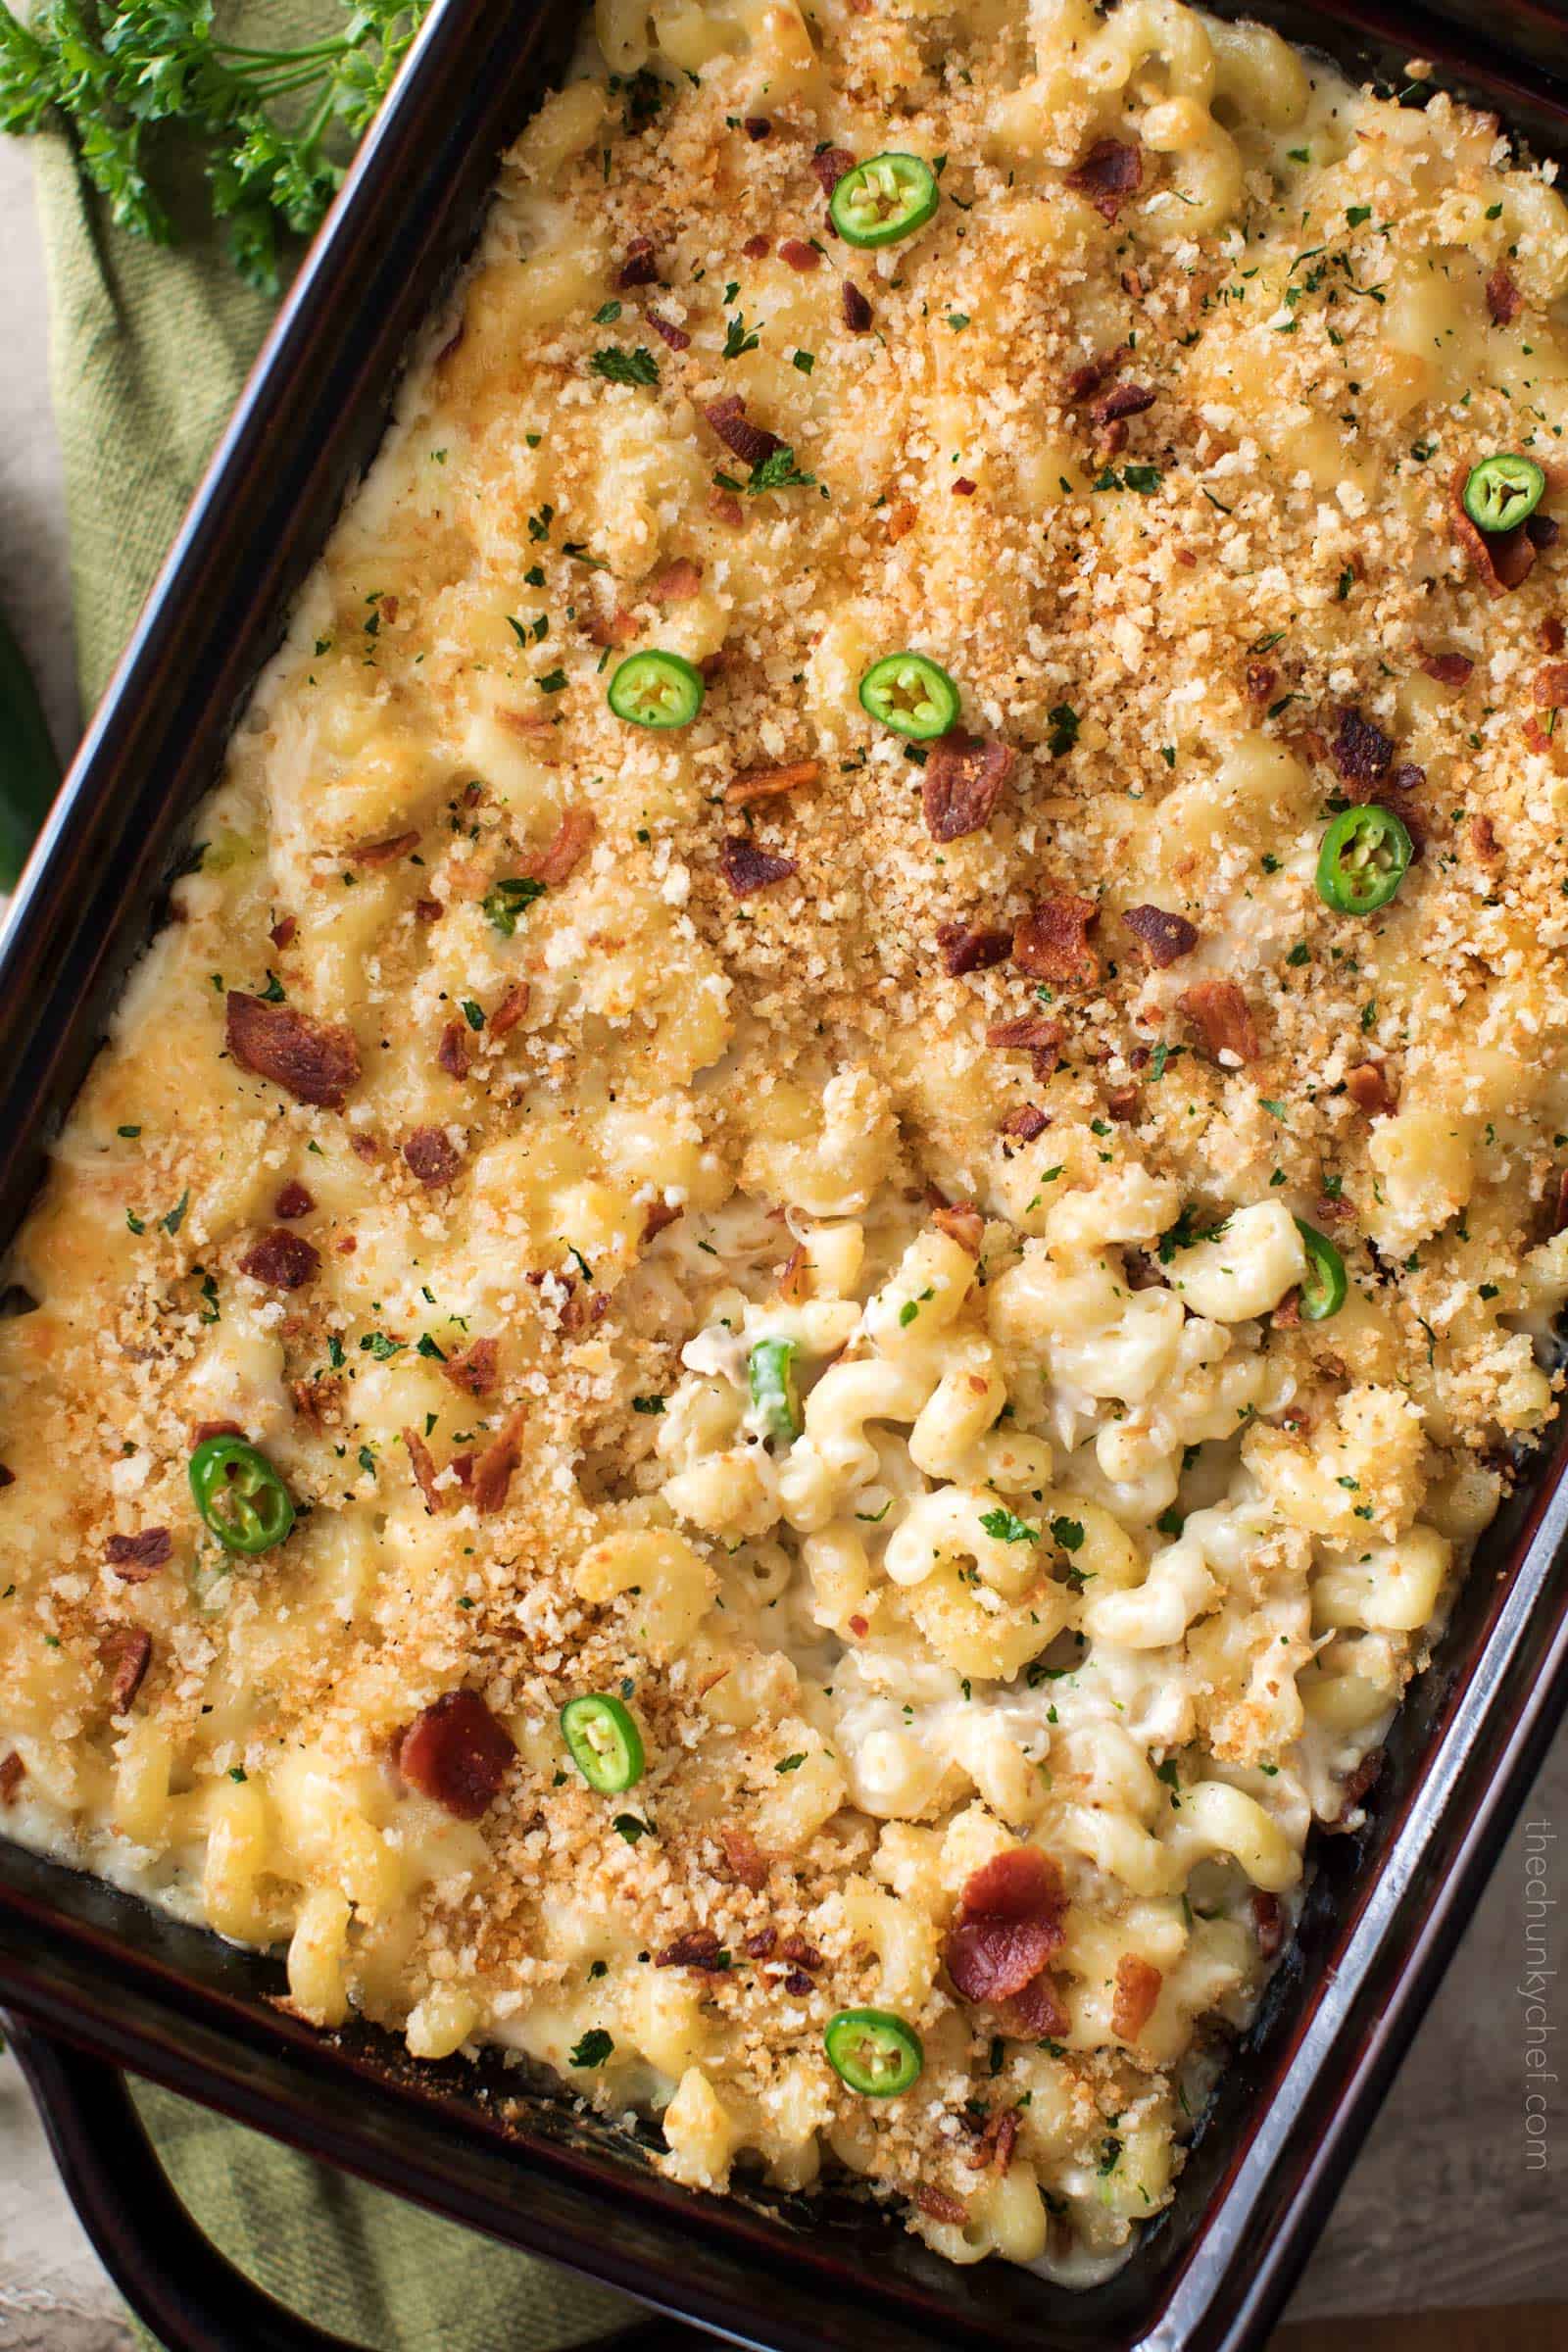 Baked Jalapeno Popper Mac and Cheese